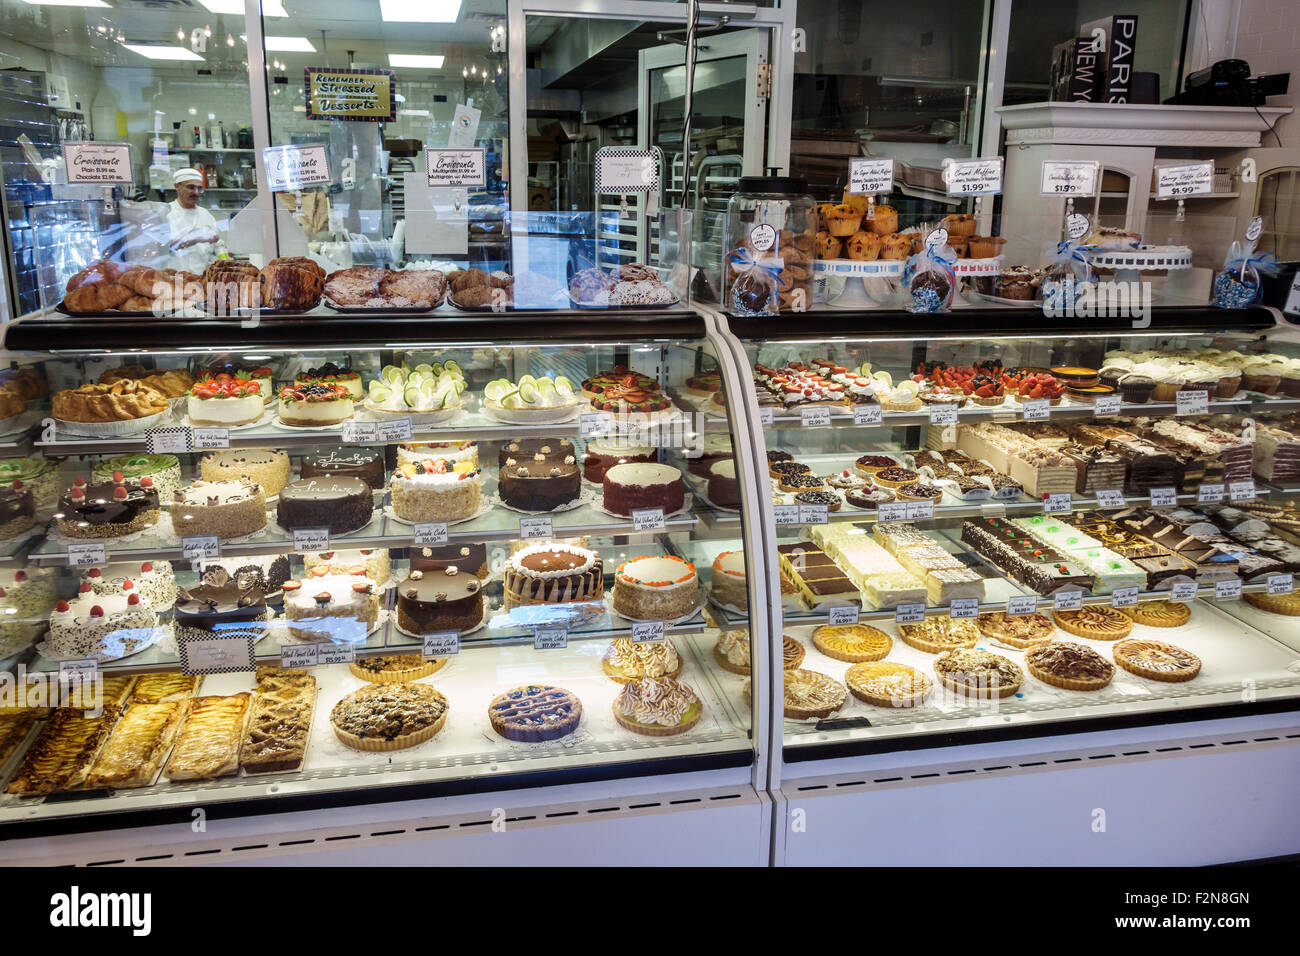 Delray Beach Florida,Gramma's Old Fashion Bakery,interior inside,display sale case,cakes,pies,desserts,sweets,FL150414036 Stock Photo